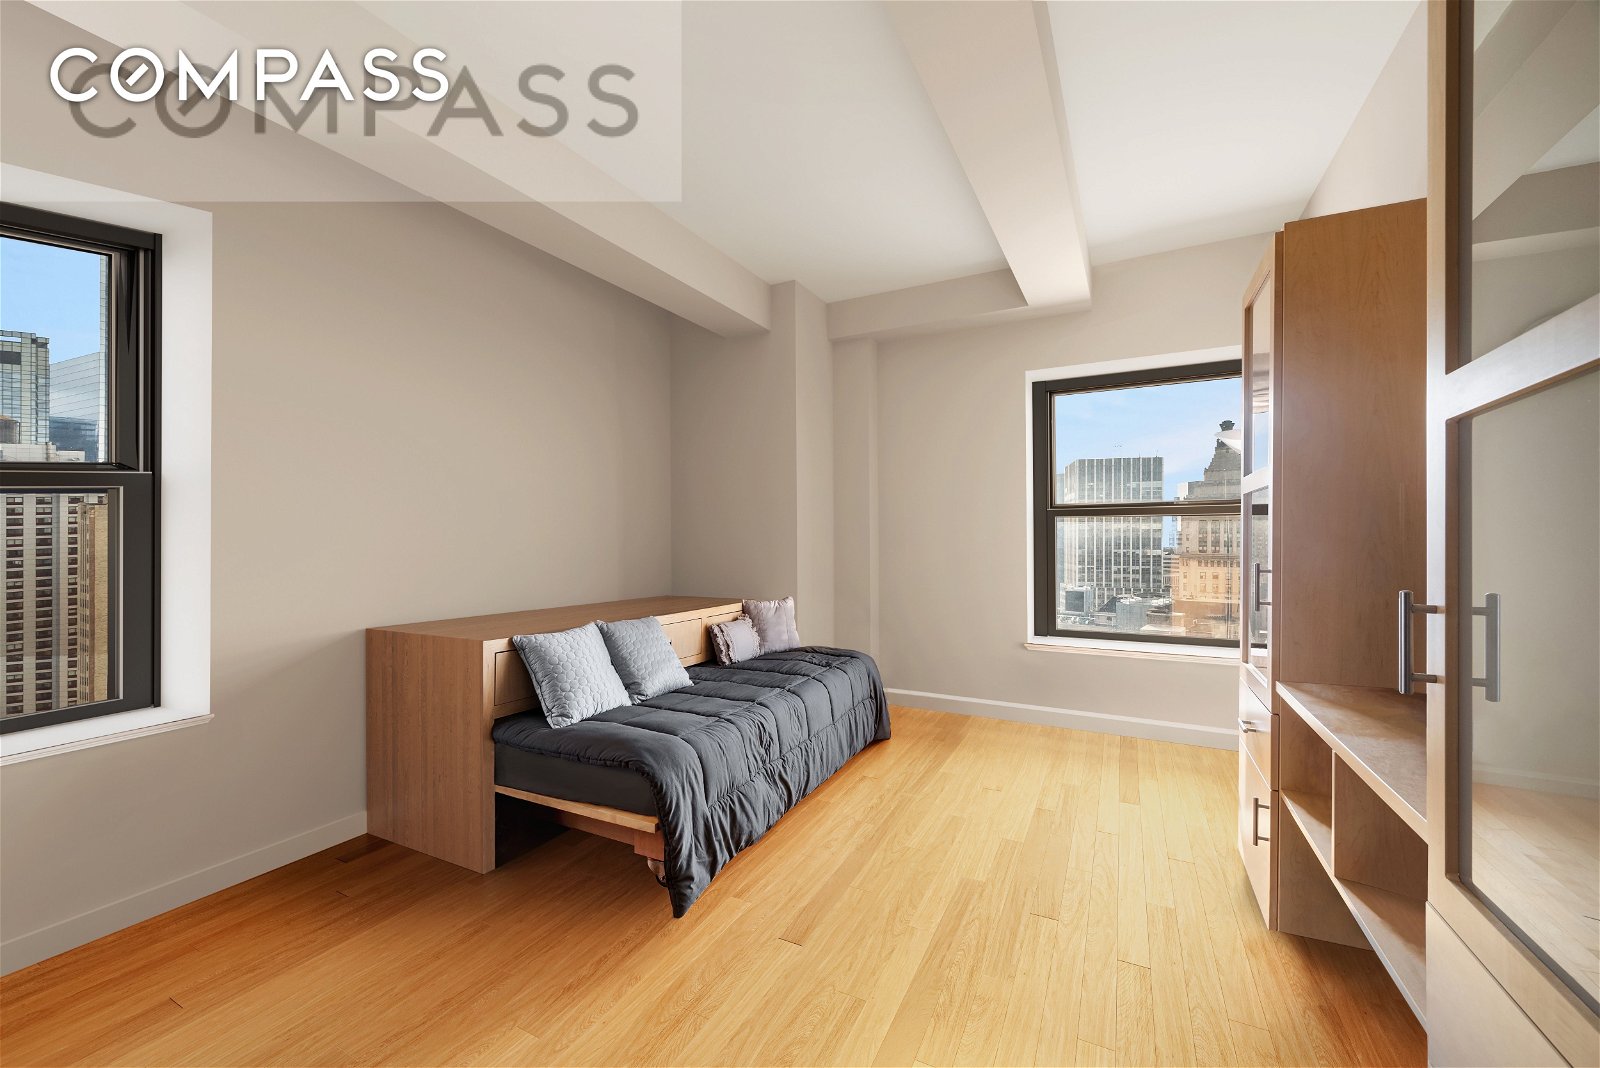 Real estate property located at 20 West #36-H, New York, New York City, NY